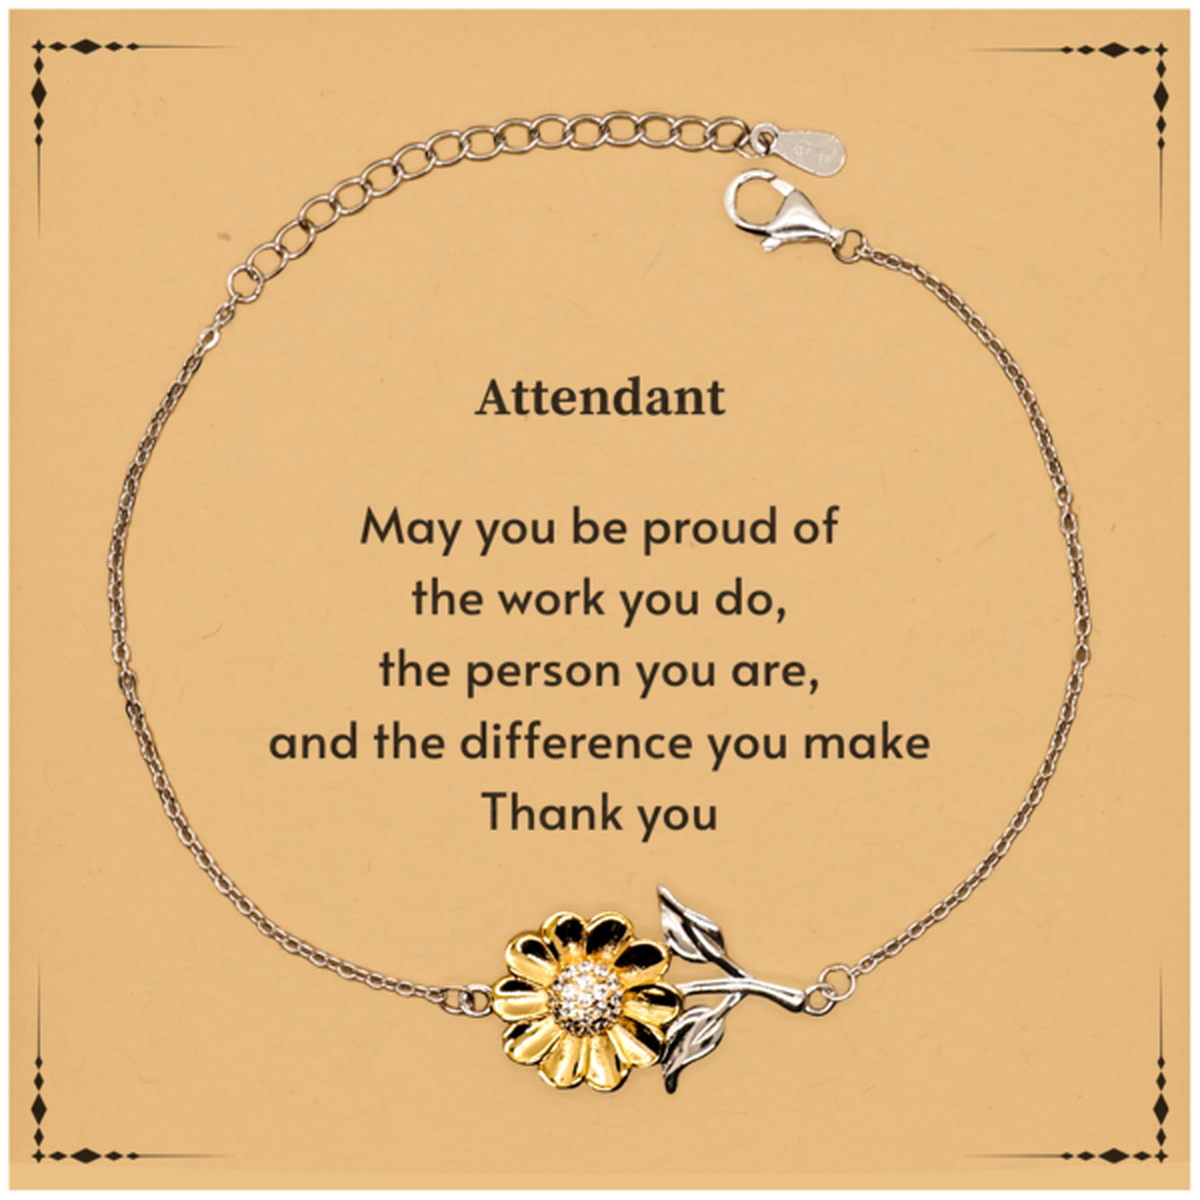 Heartwarming Sunflower Bracelet Retirement Coworkers Gifts for Attendant, Attendant May You be proud of the work you do, the person you are Gifts for Boss Men Women Friends